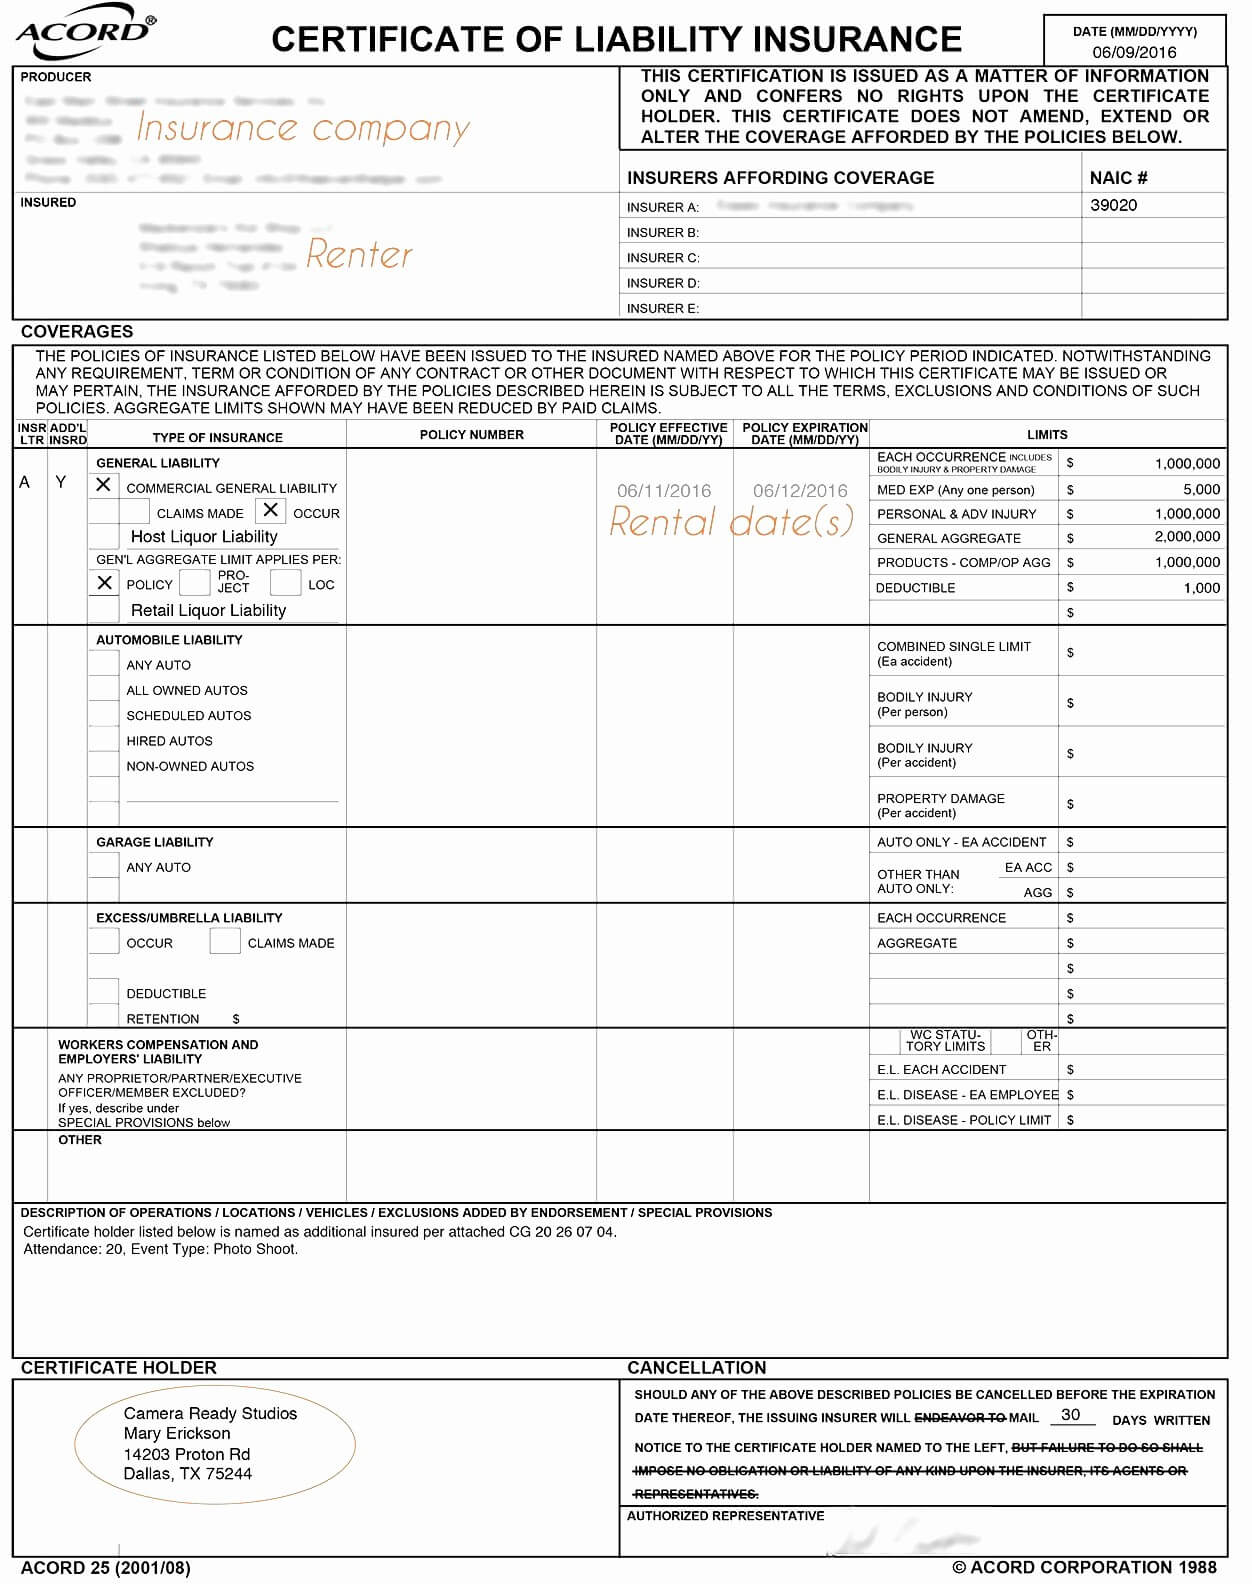 009 20Acord Form Fresh Certificate Liability Insurance Regarding Acord Insurance Certificate Template